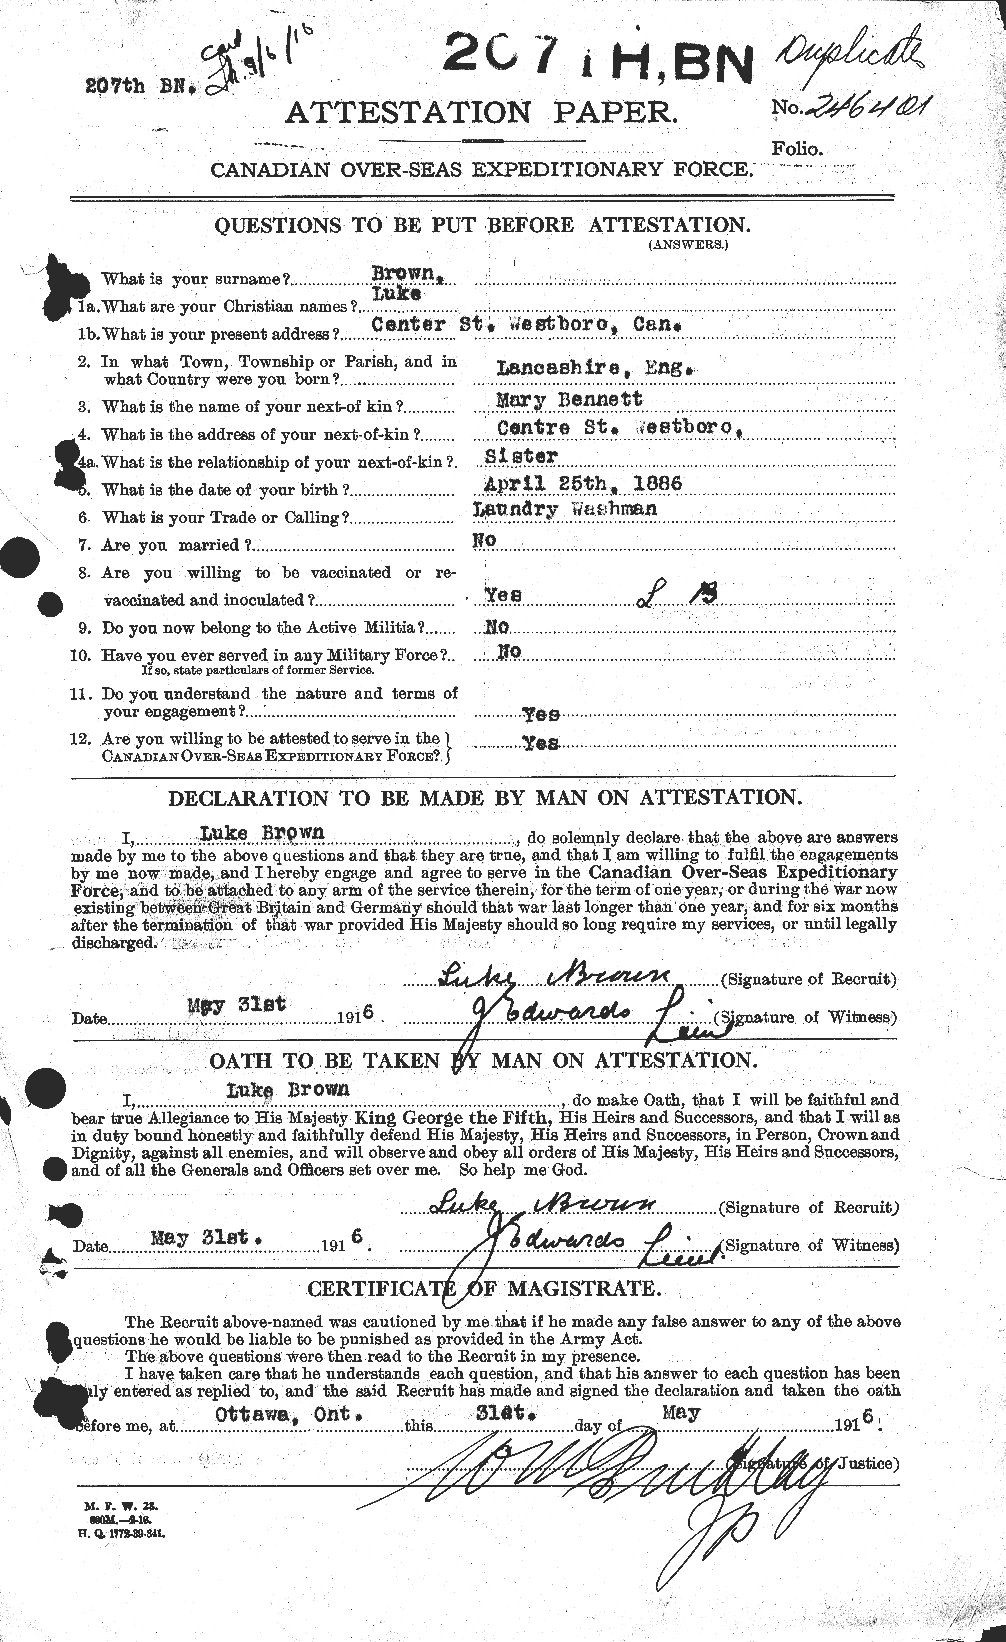 Personnel Records of the First World War - CEF 266342a